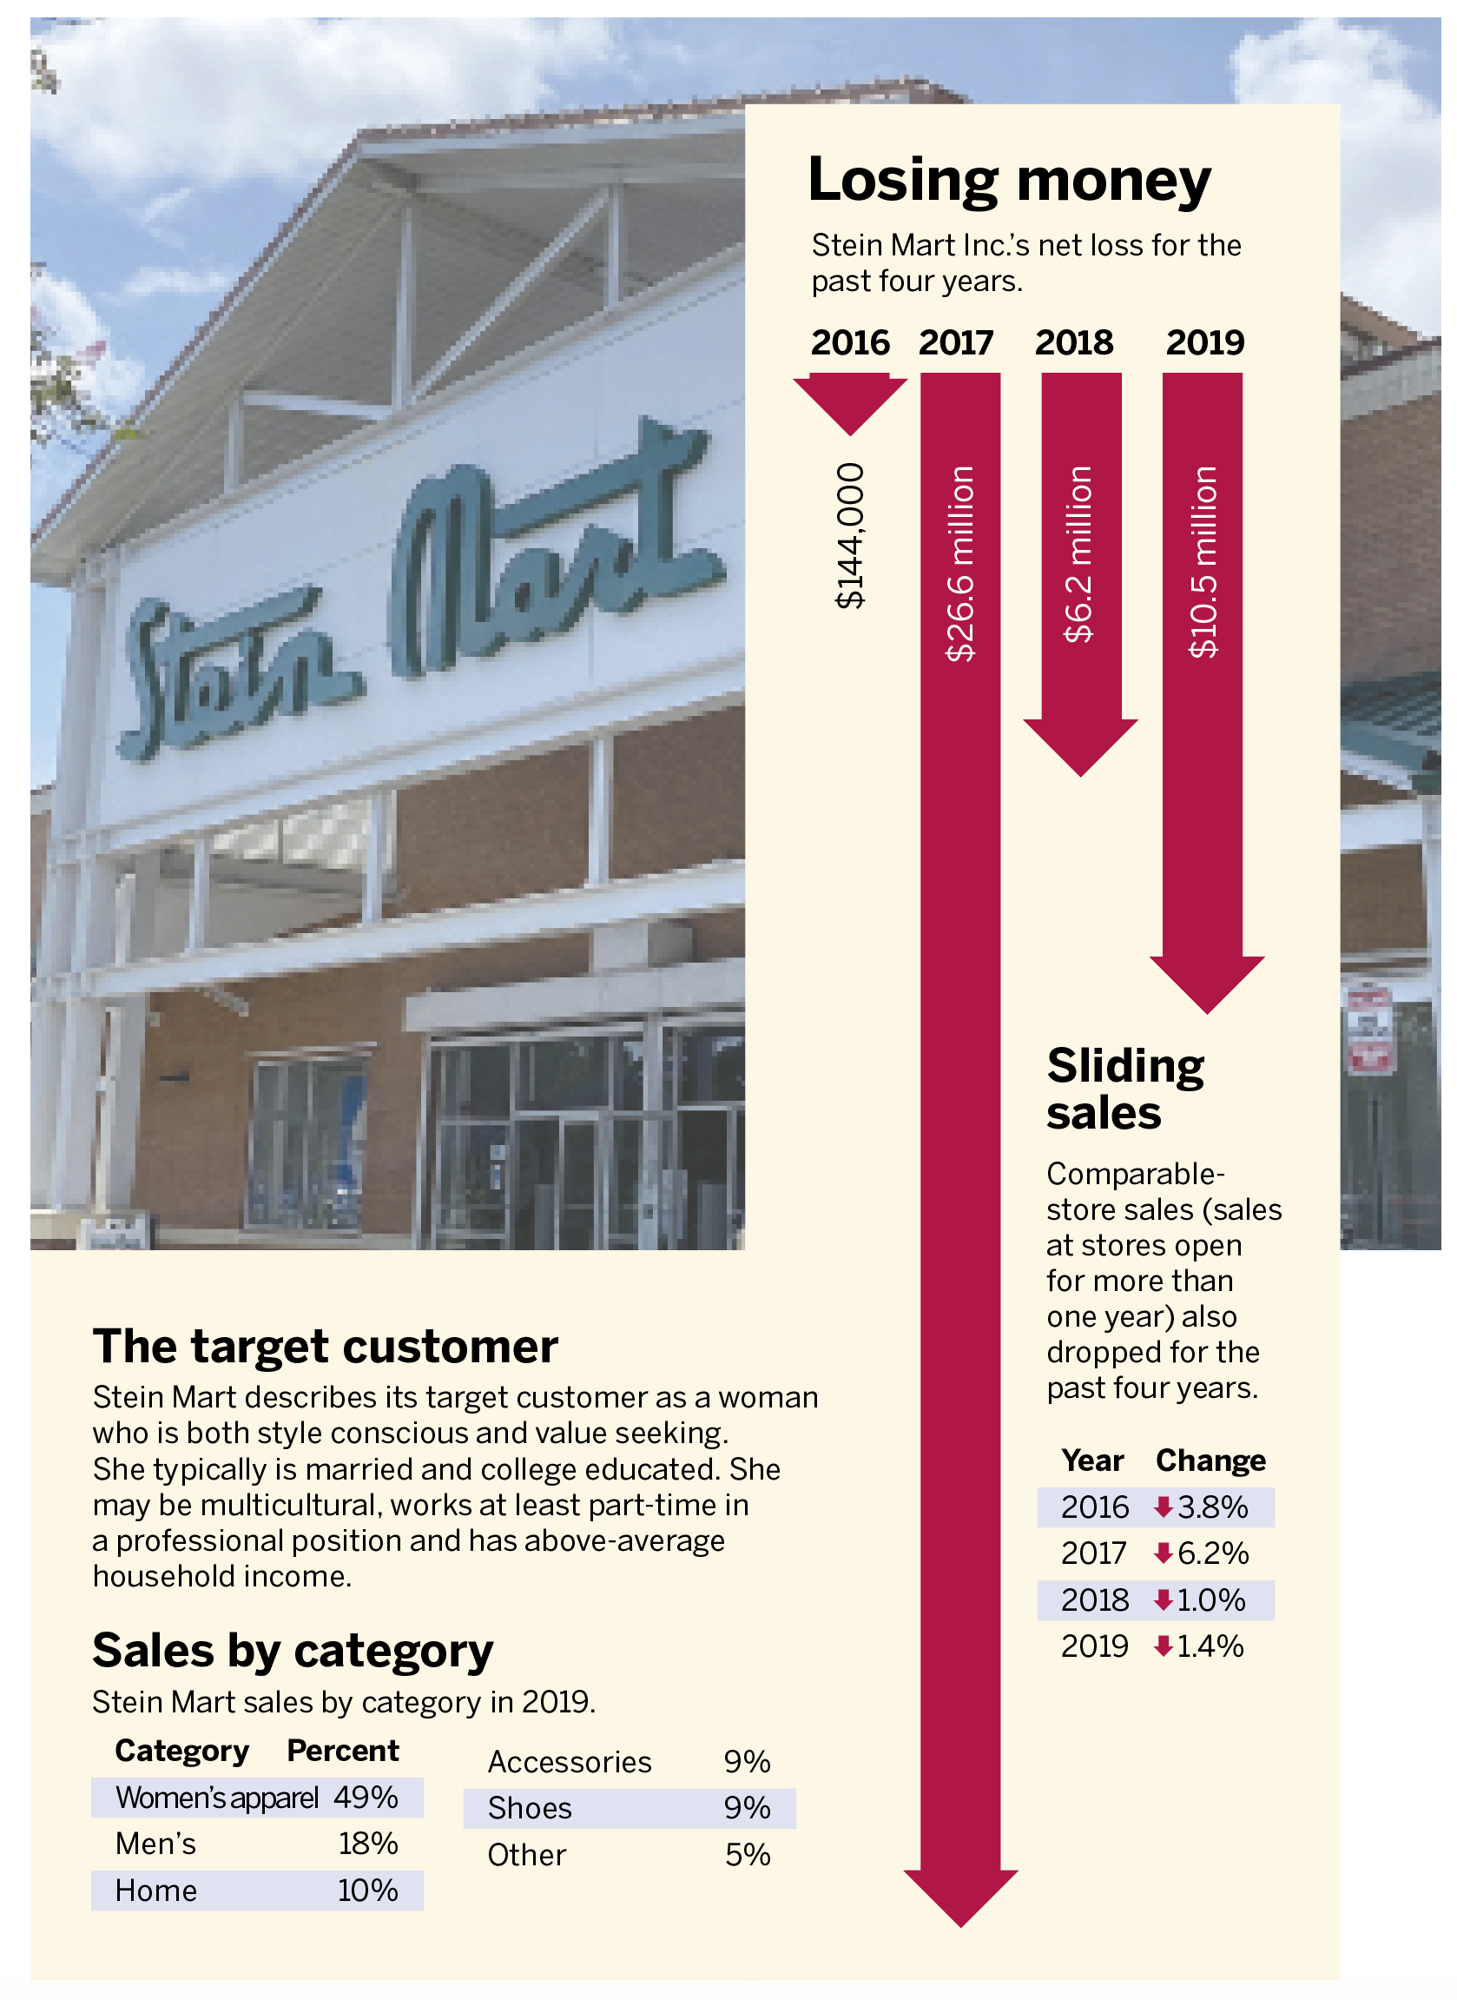 Closed Jacksonville Stein Mart stores finding new tenants